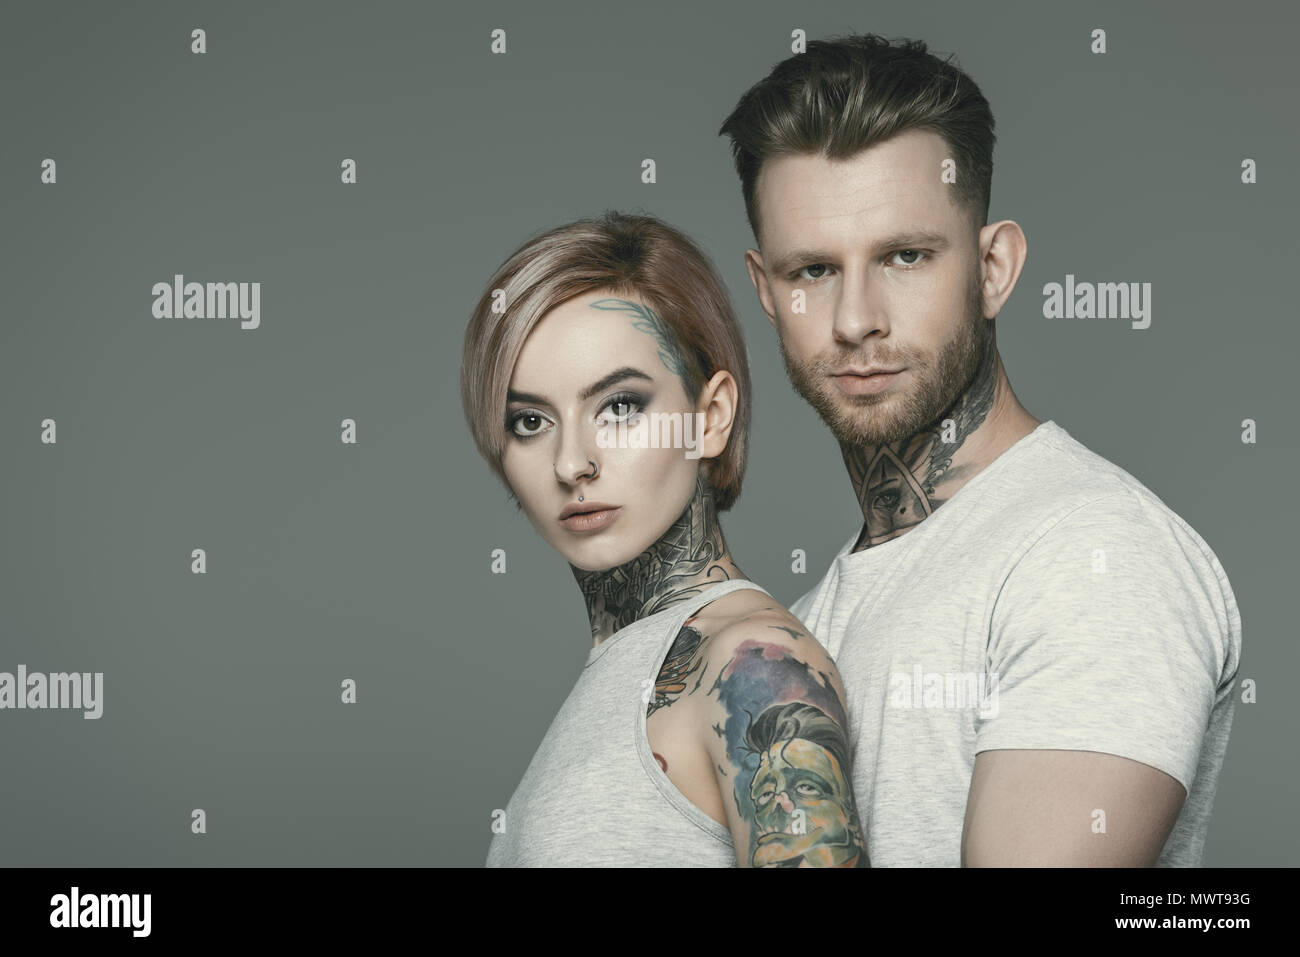 Tattooed couples photography, Couple photos, Couples